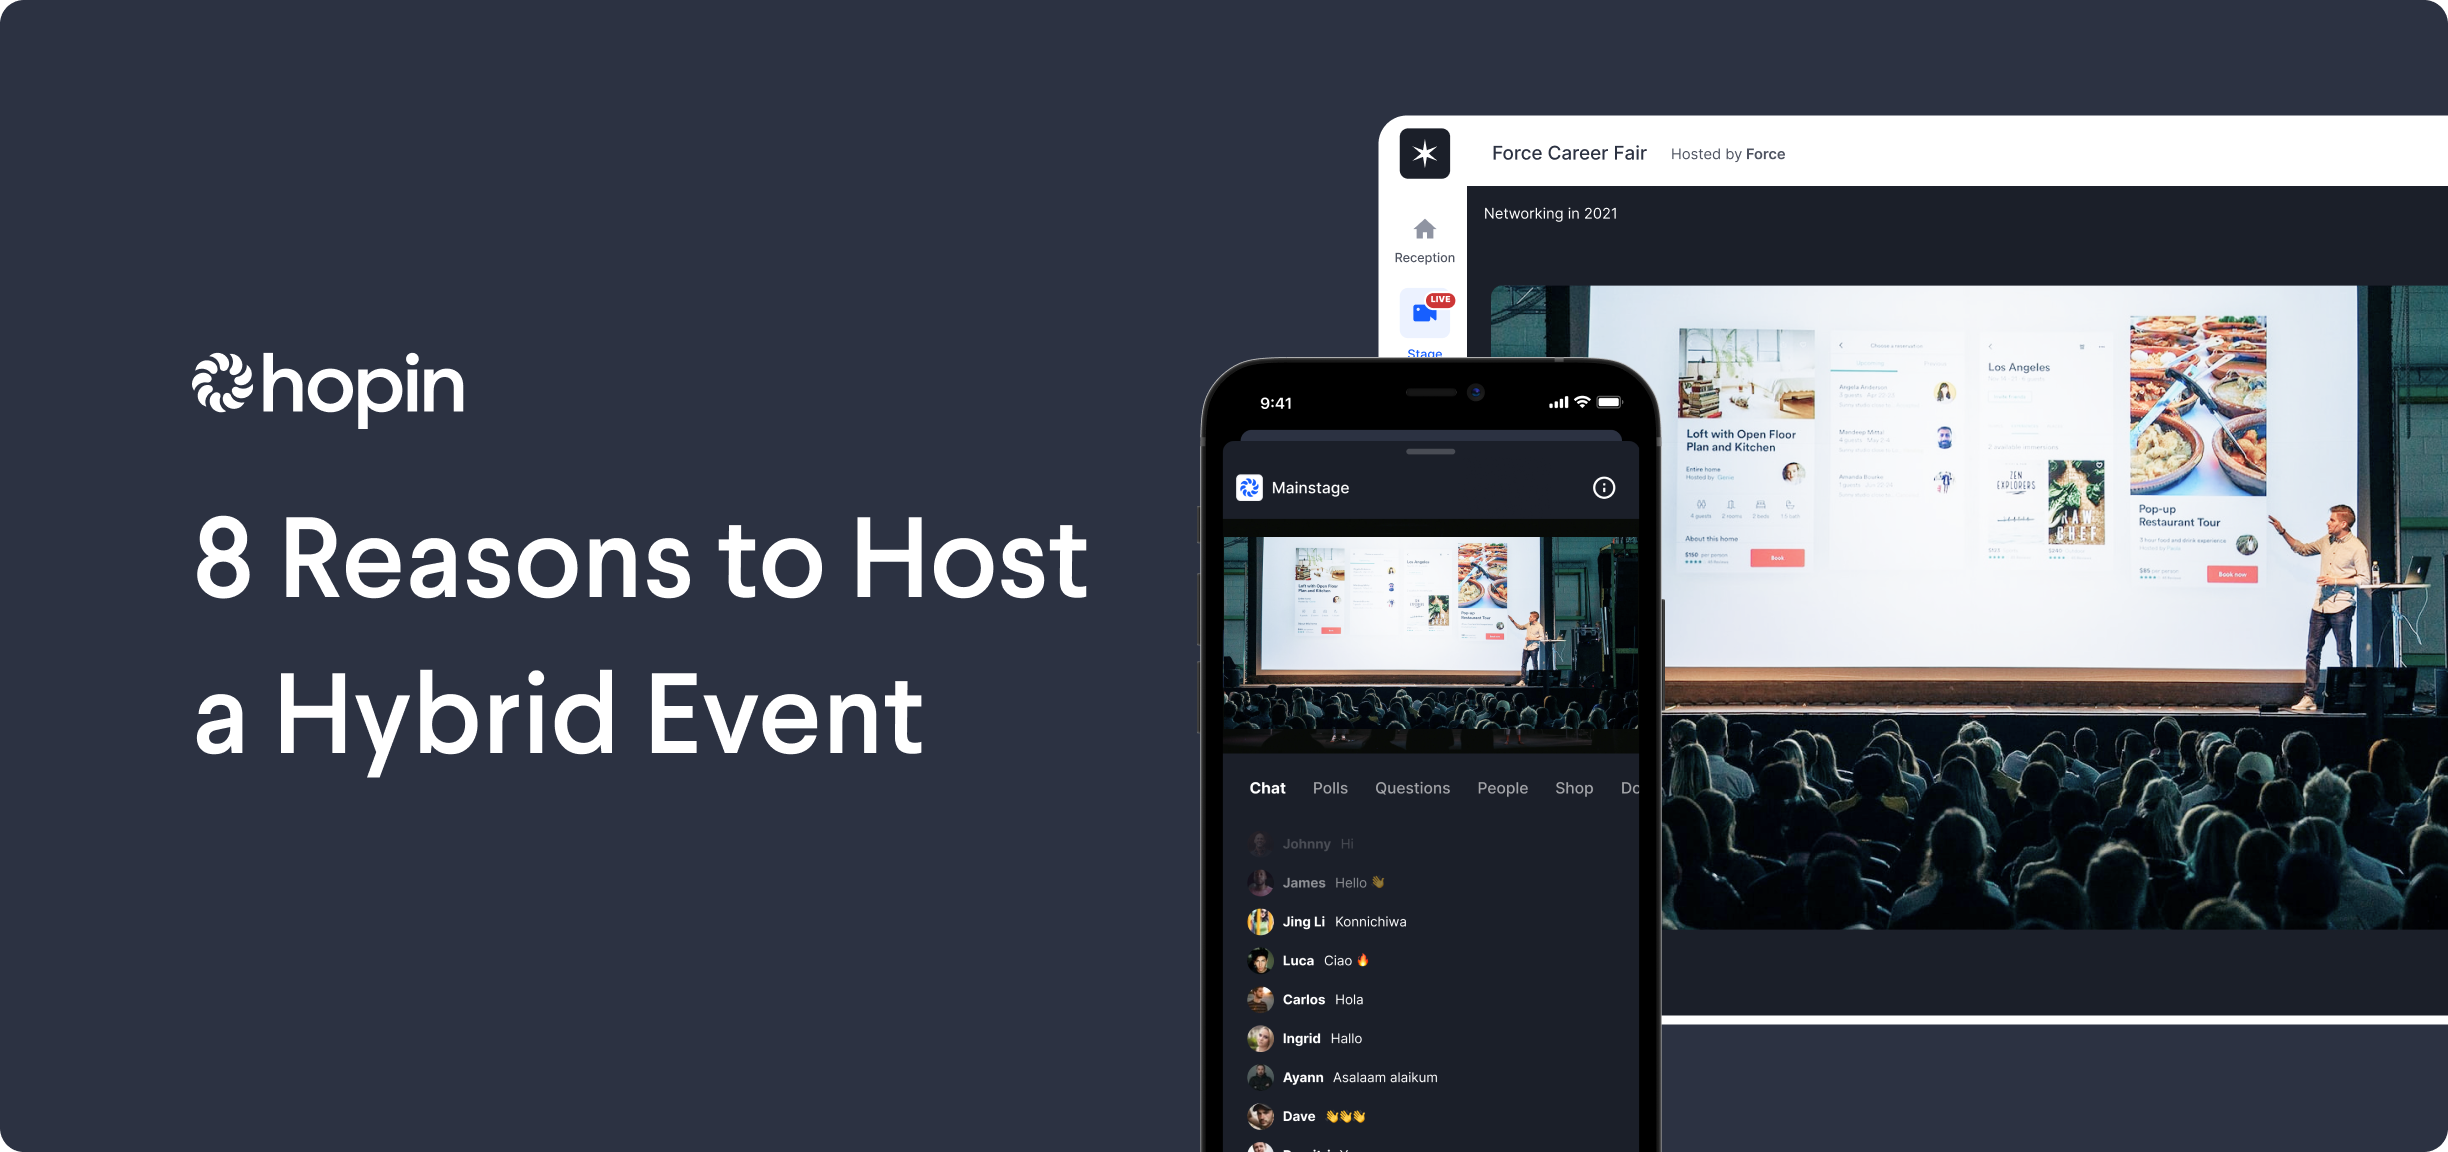 How To Host A Hybrid Event